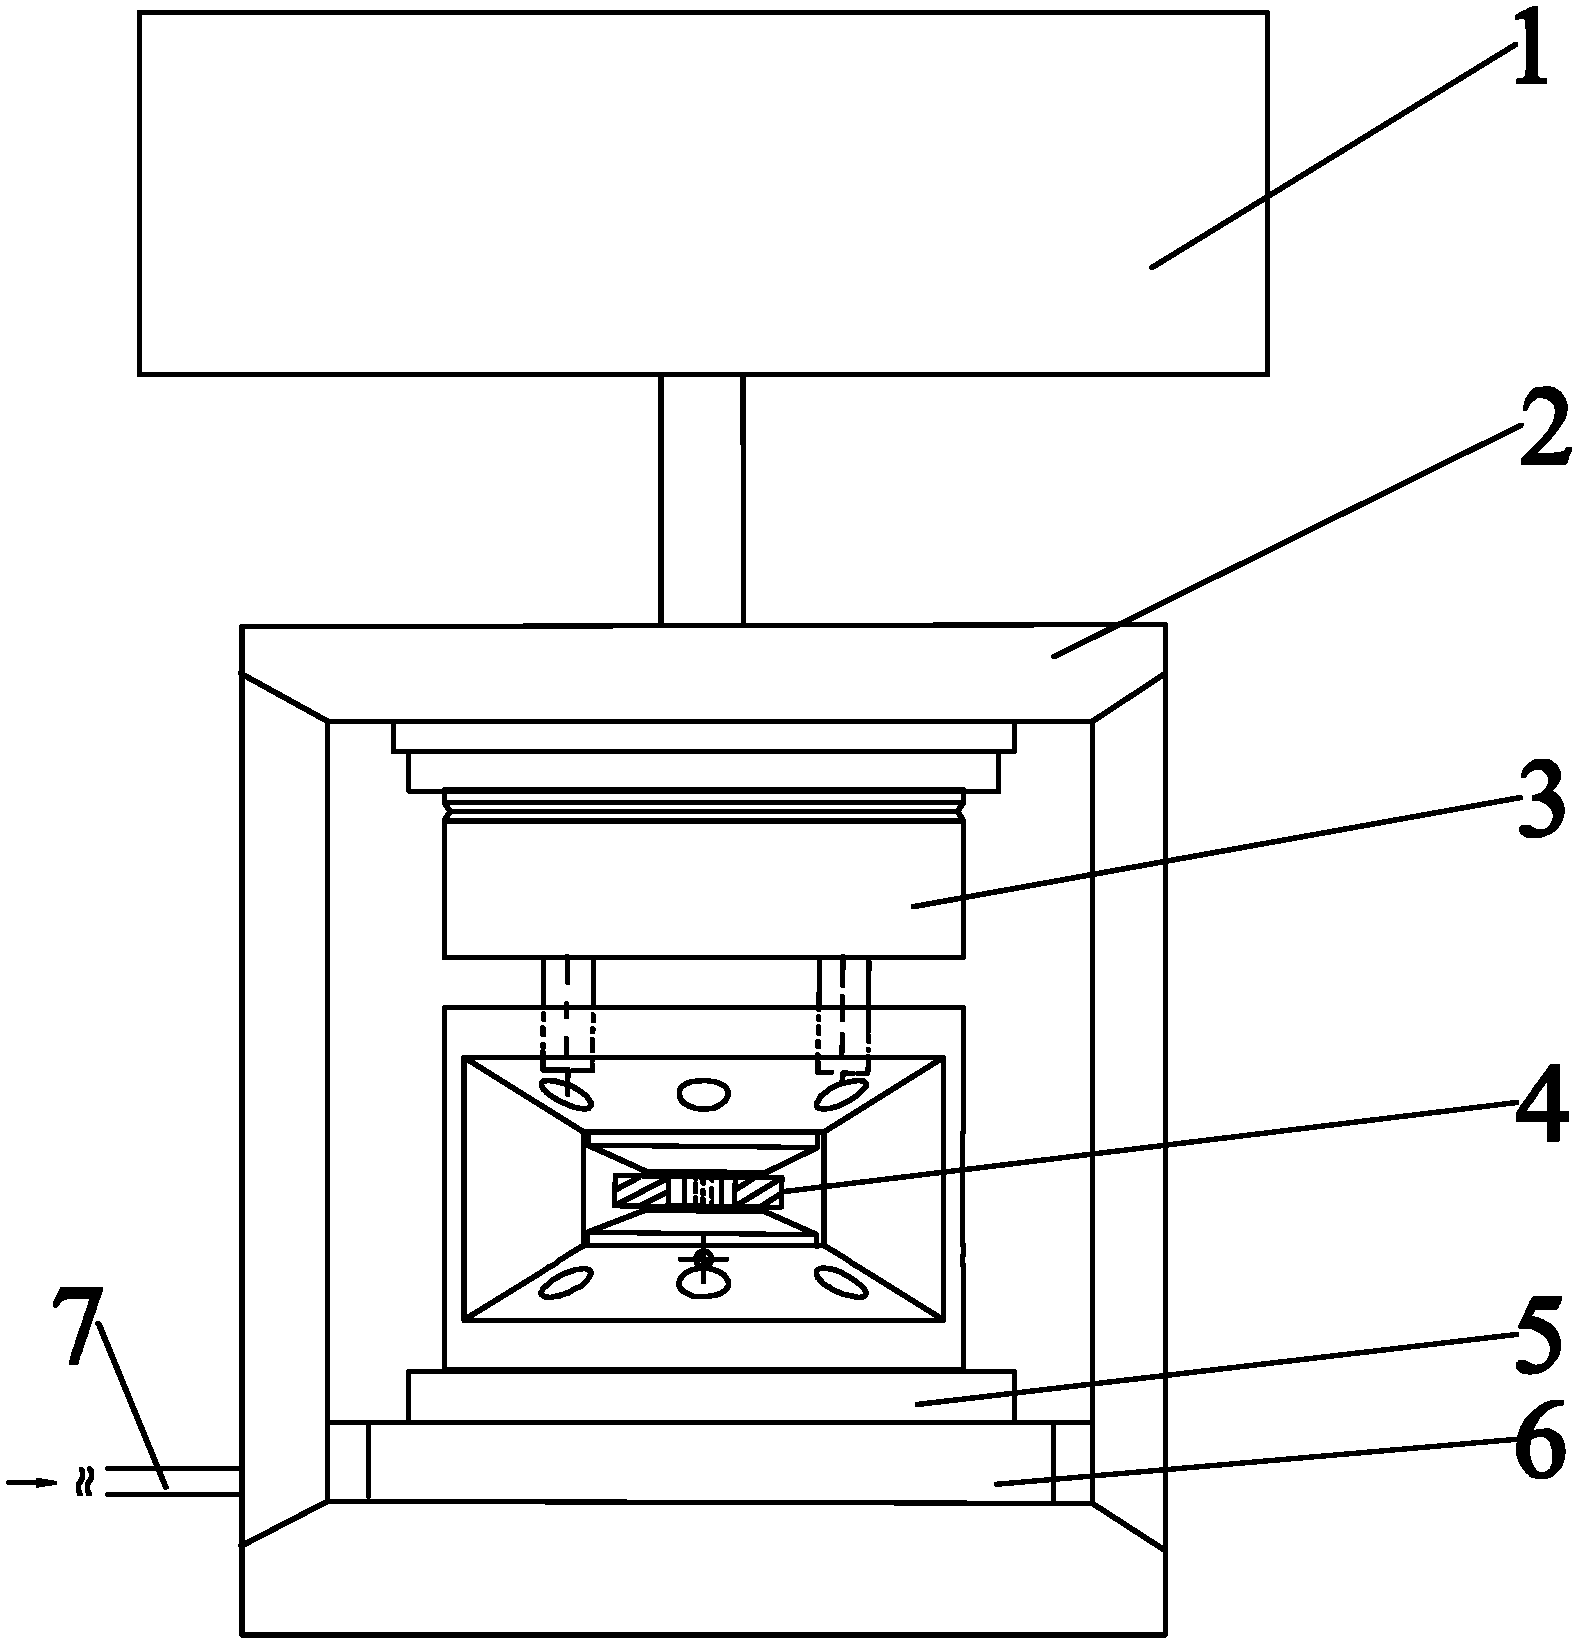 Anvil cell high pressure device for in situ neutron diffraction